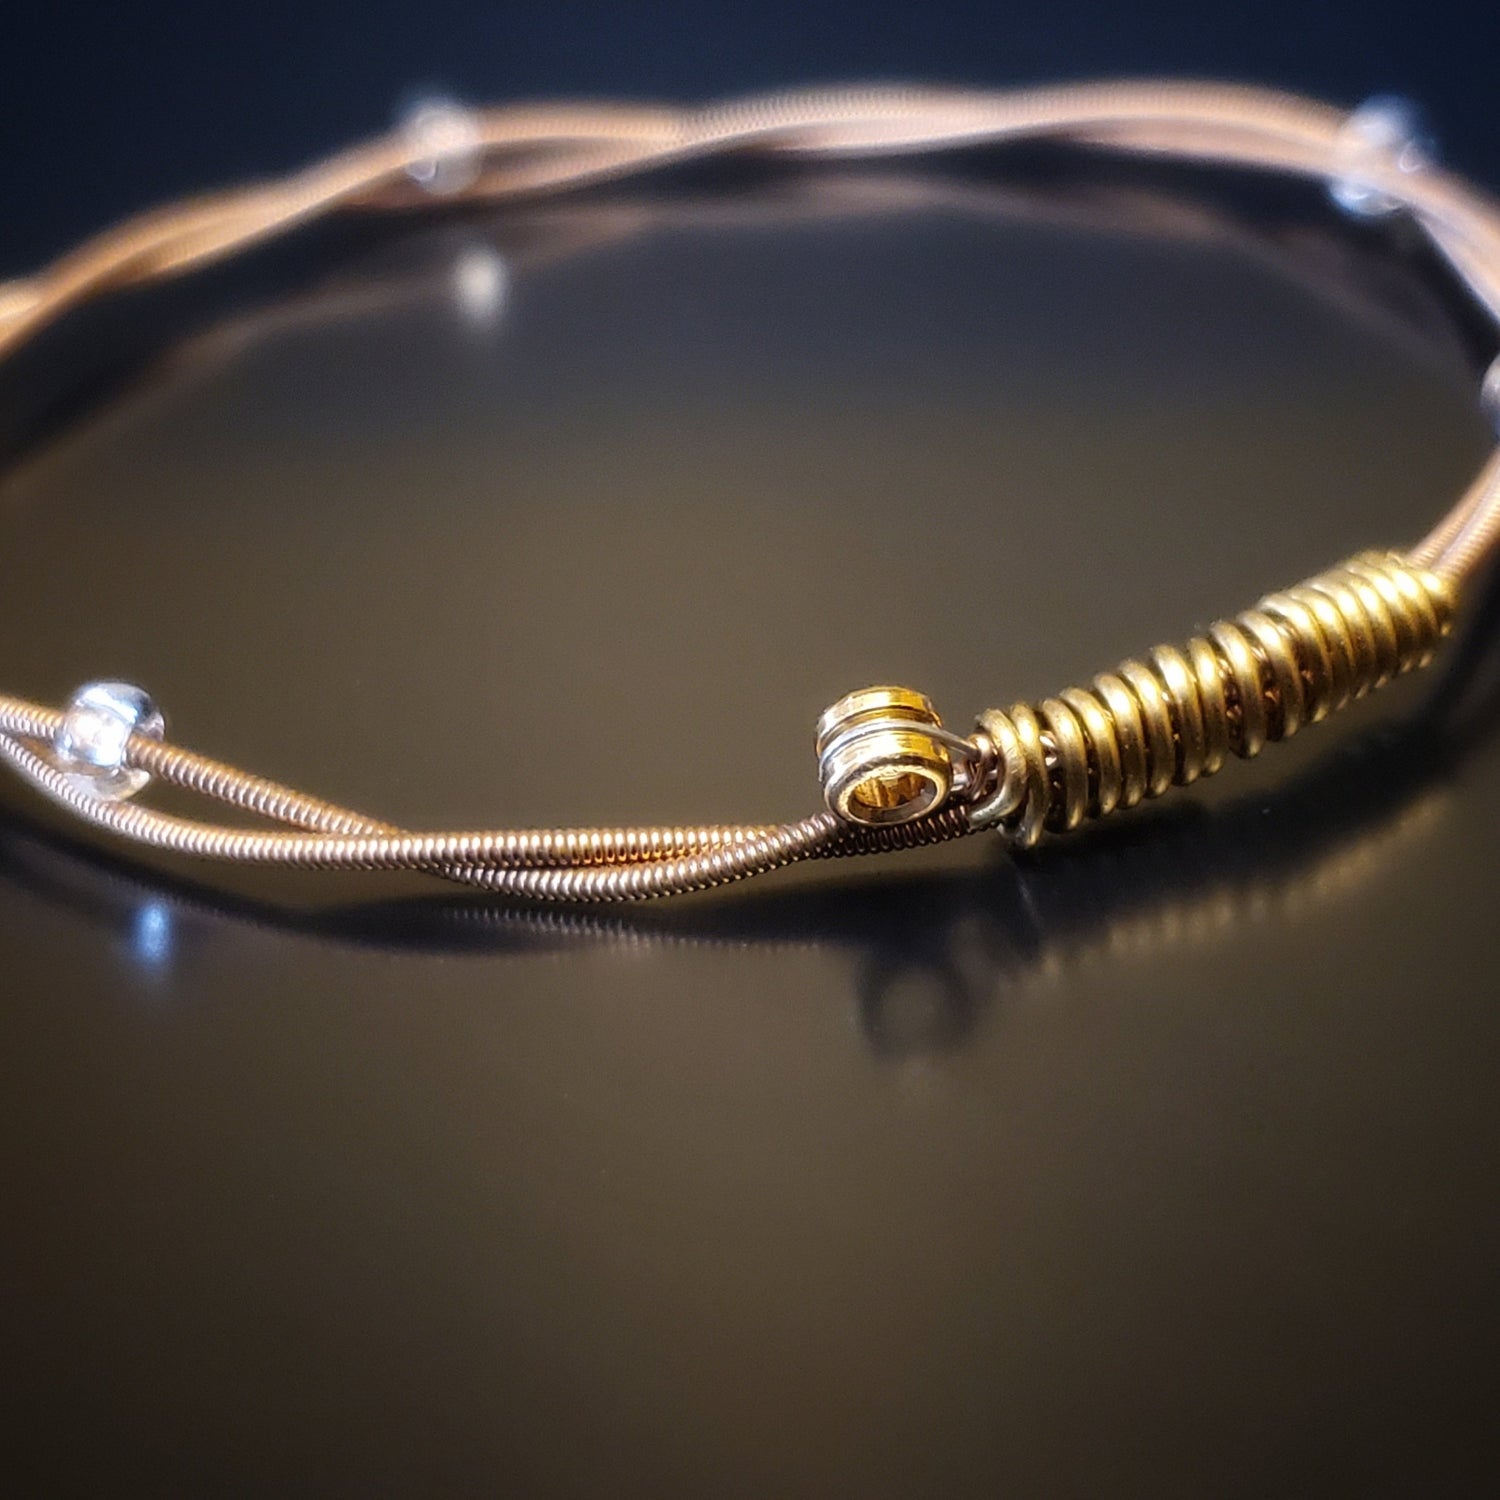 copper coloured bangle style guitar string bracelet with clear glass beads with black background